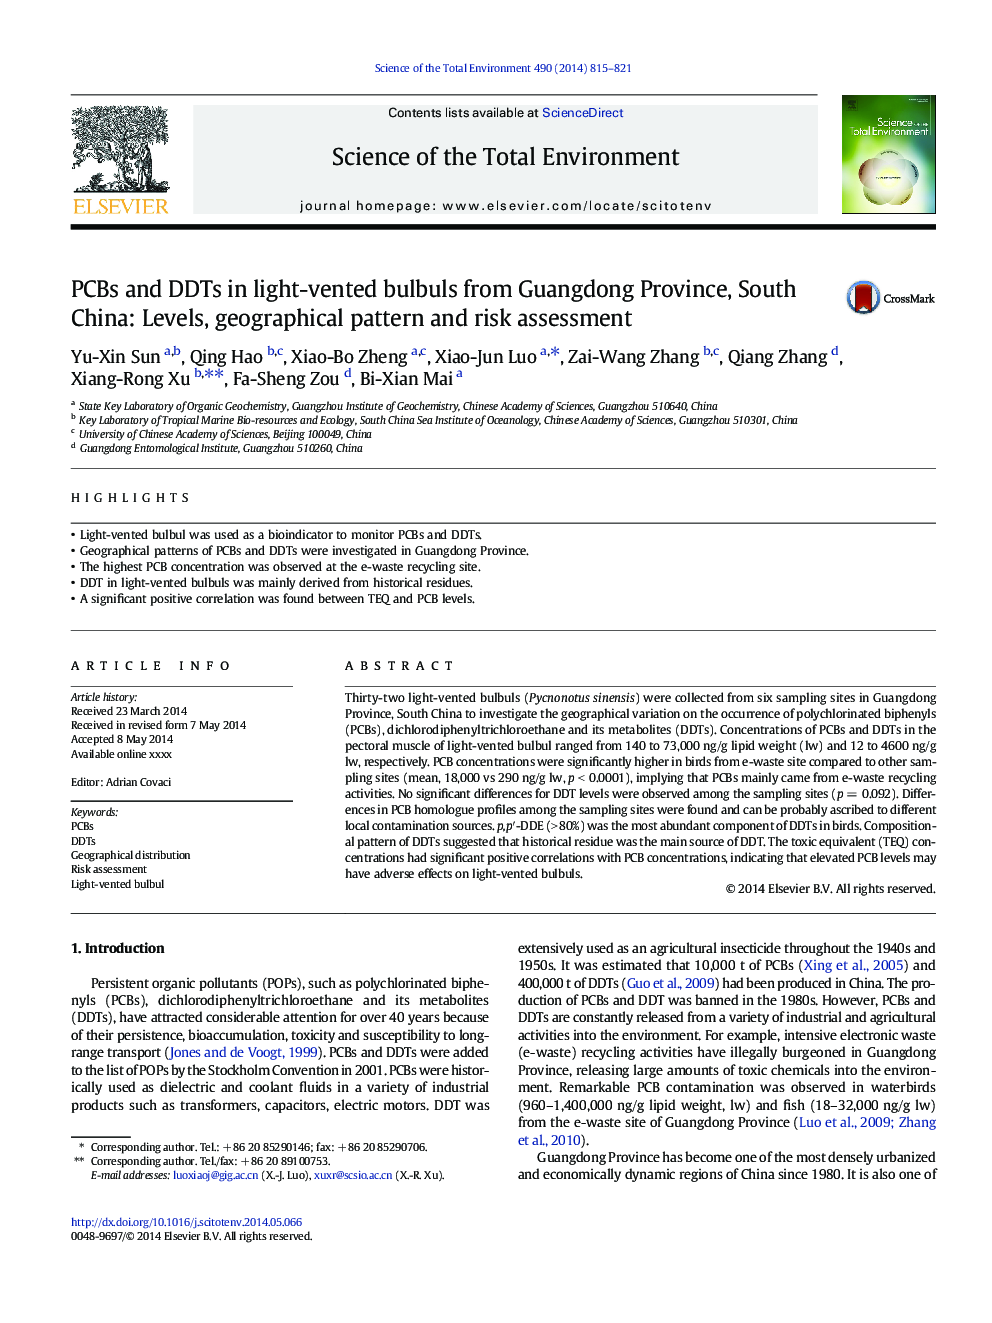 PCBs and DDTs in light-vented bulbuls from Guangdong Province, South China: Levels, geographical pattern and risk assessment